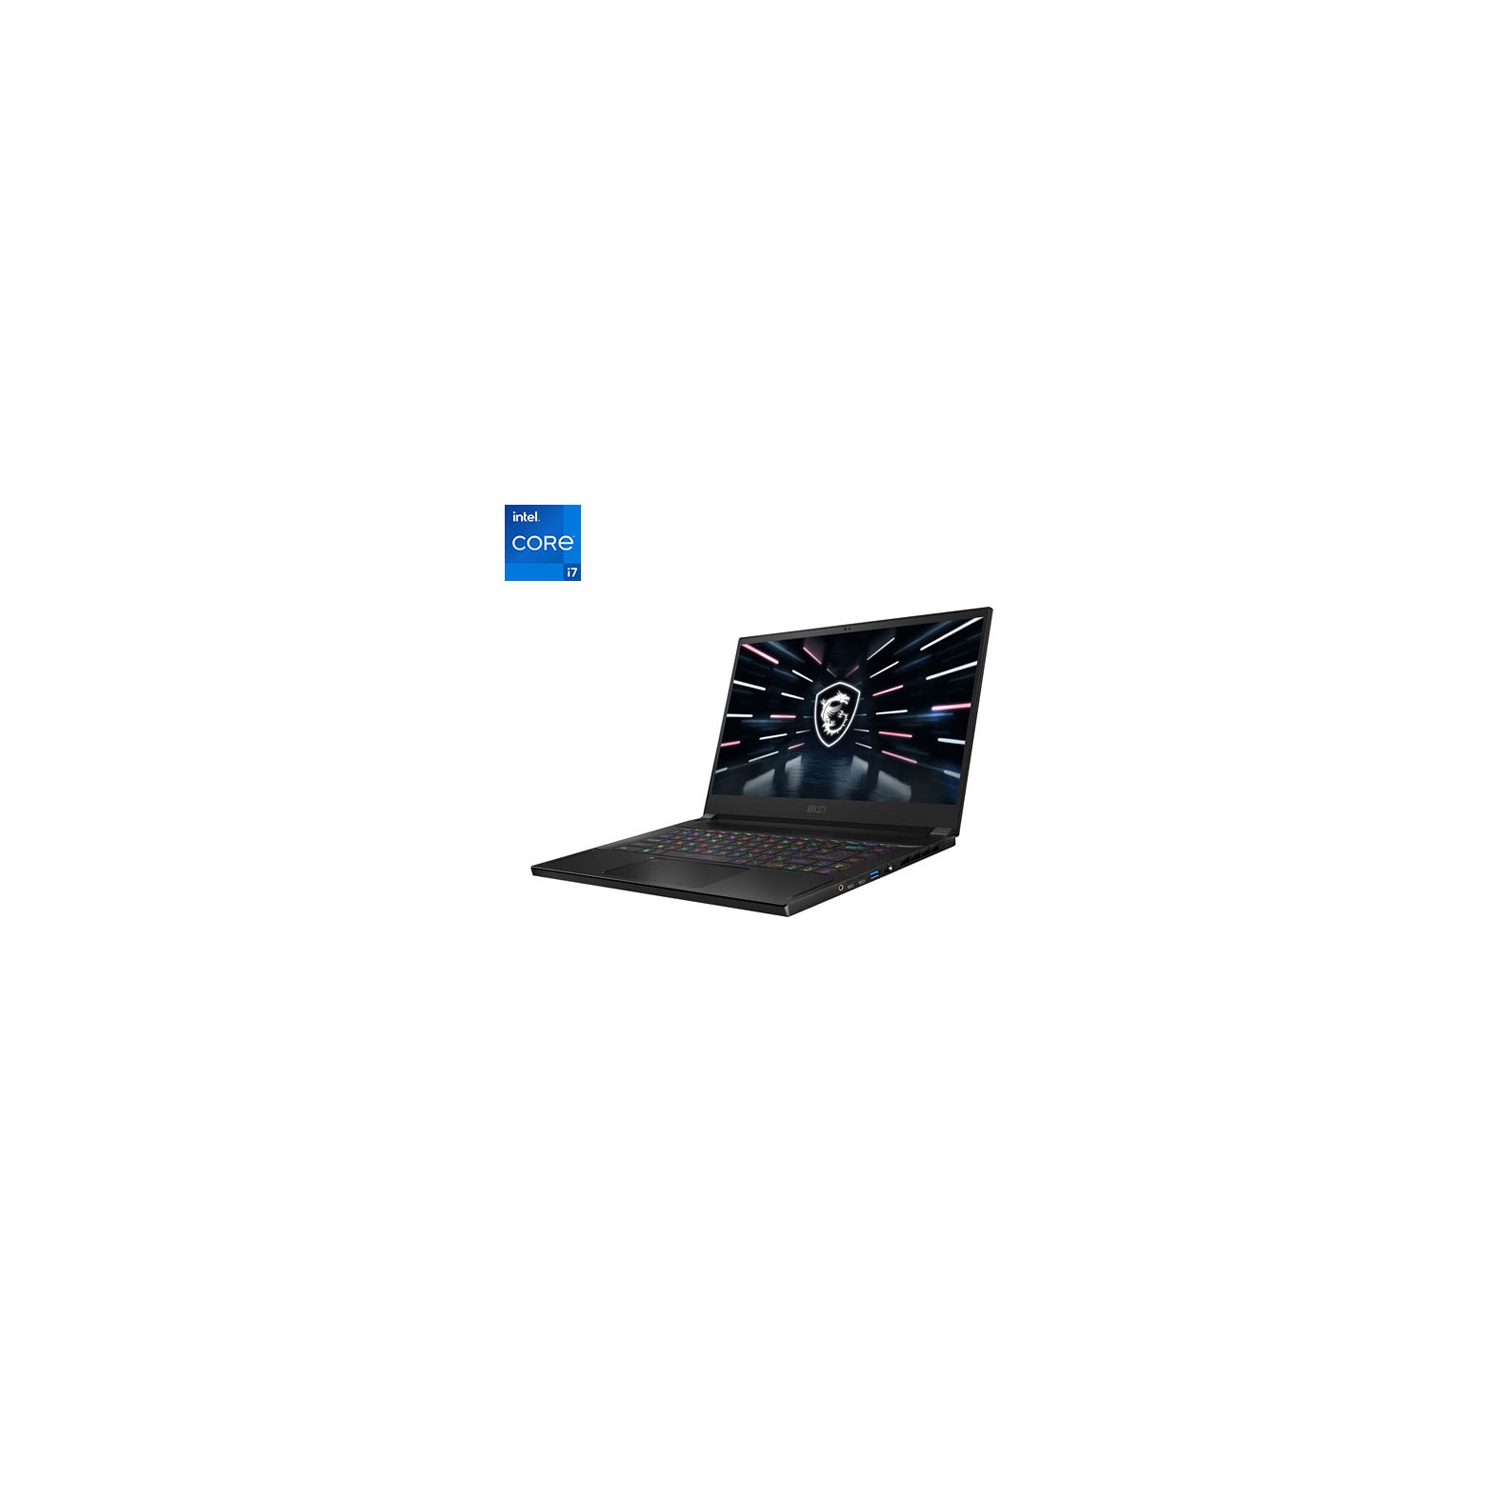 Refurbished (Excellent) - MSI GS66 Stealth 15.6" Gaming Laptop - Black (Intel Core i7-12700H/1TB SSD/16GB RAM/RTX 3060/Windows 11)